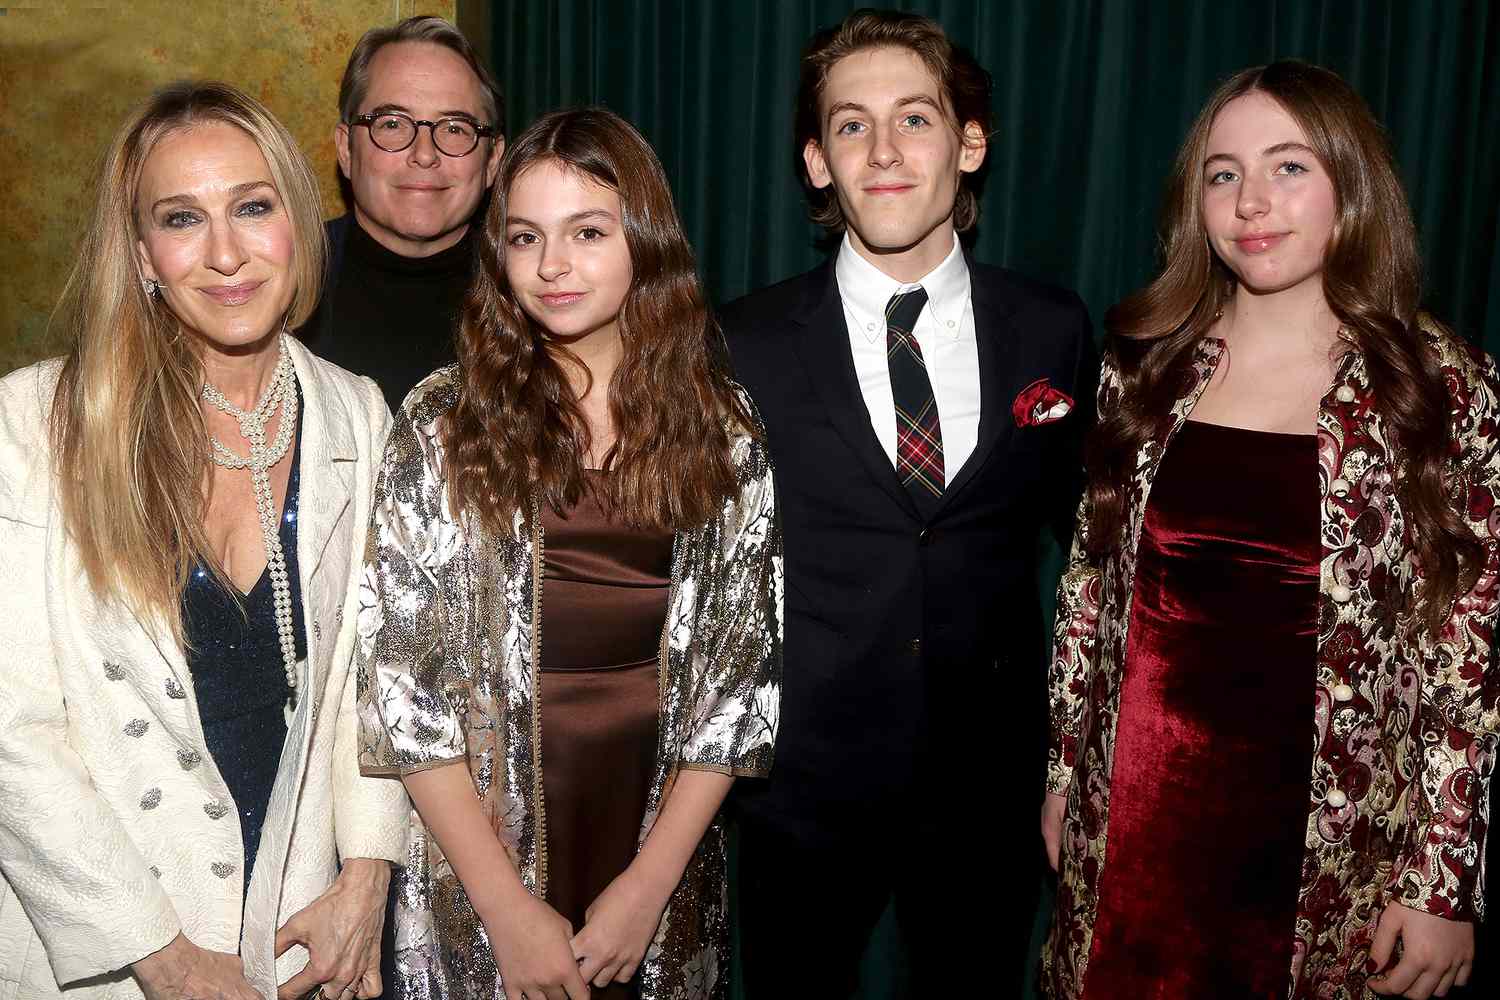 Sarah Jessica Parker Celebrates Her and Matthew Broderick's Twin Daughters on Their 15th Birthday: 'So Lucky'